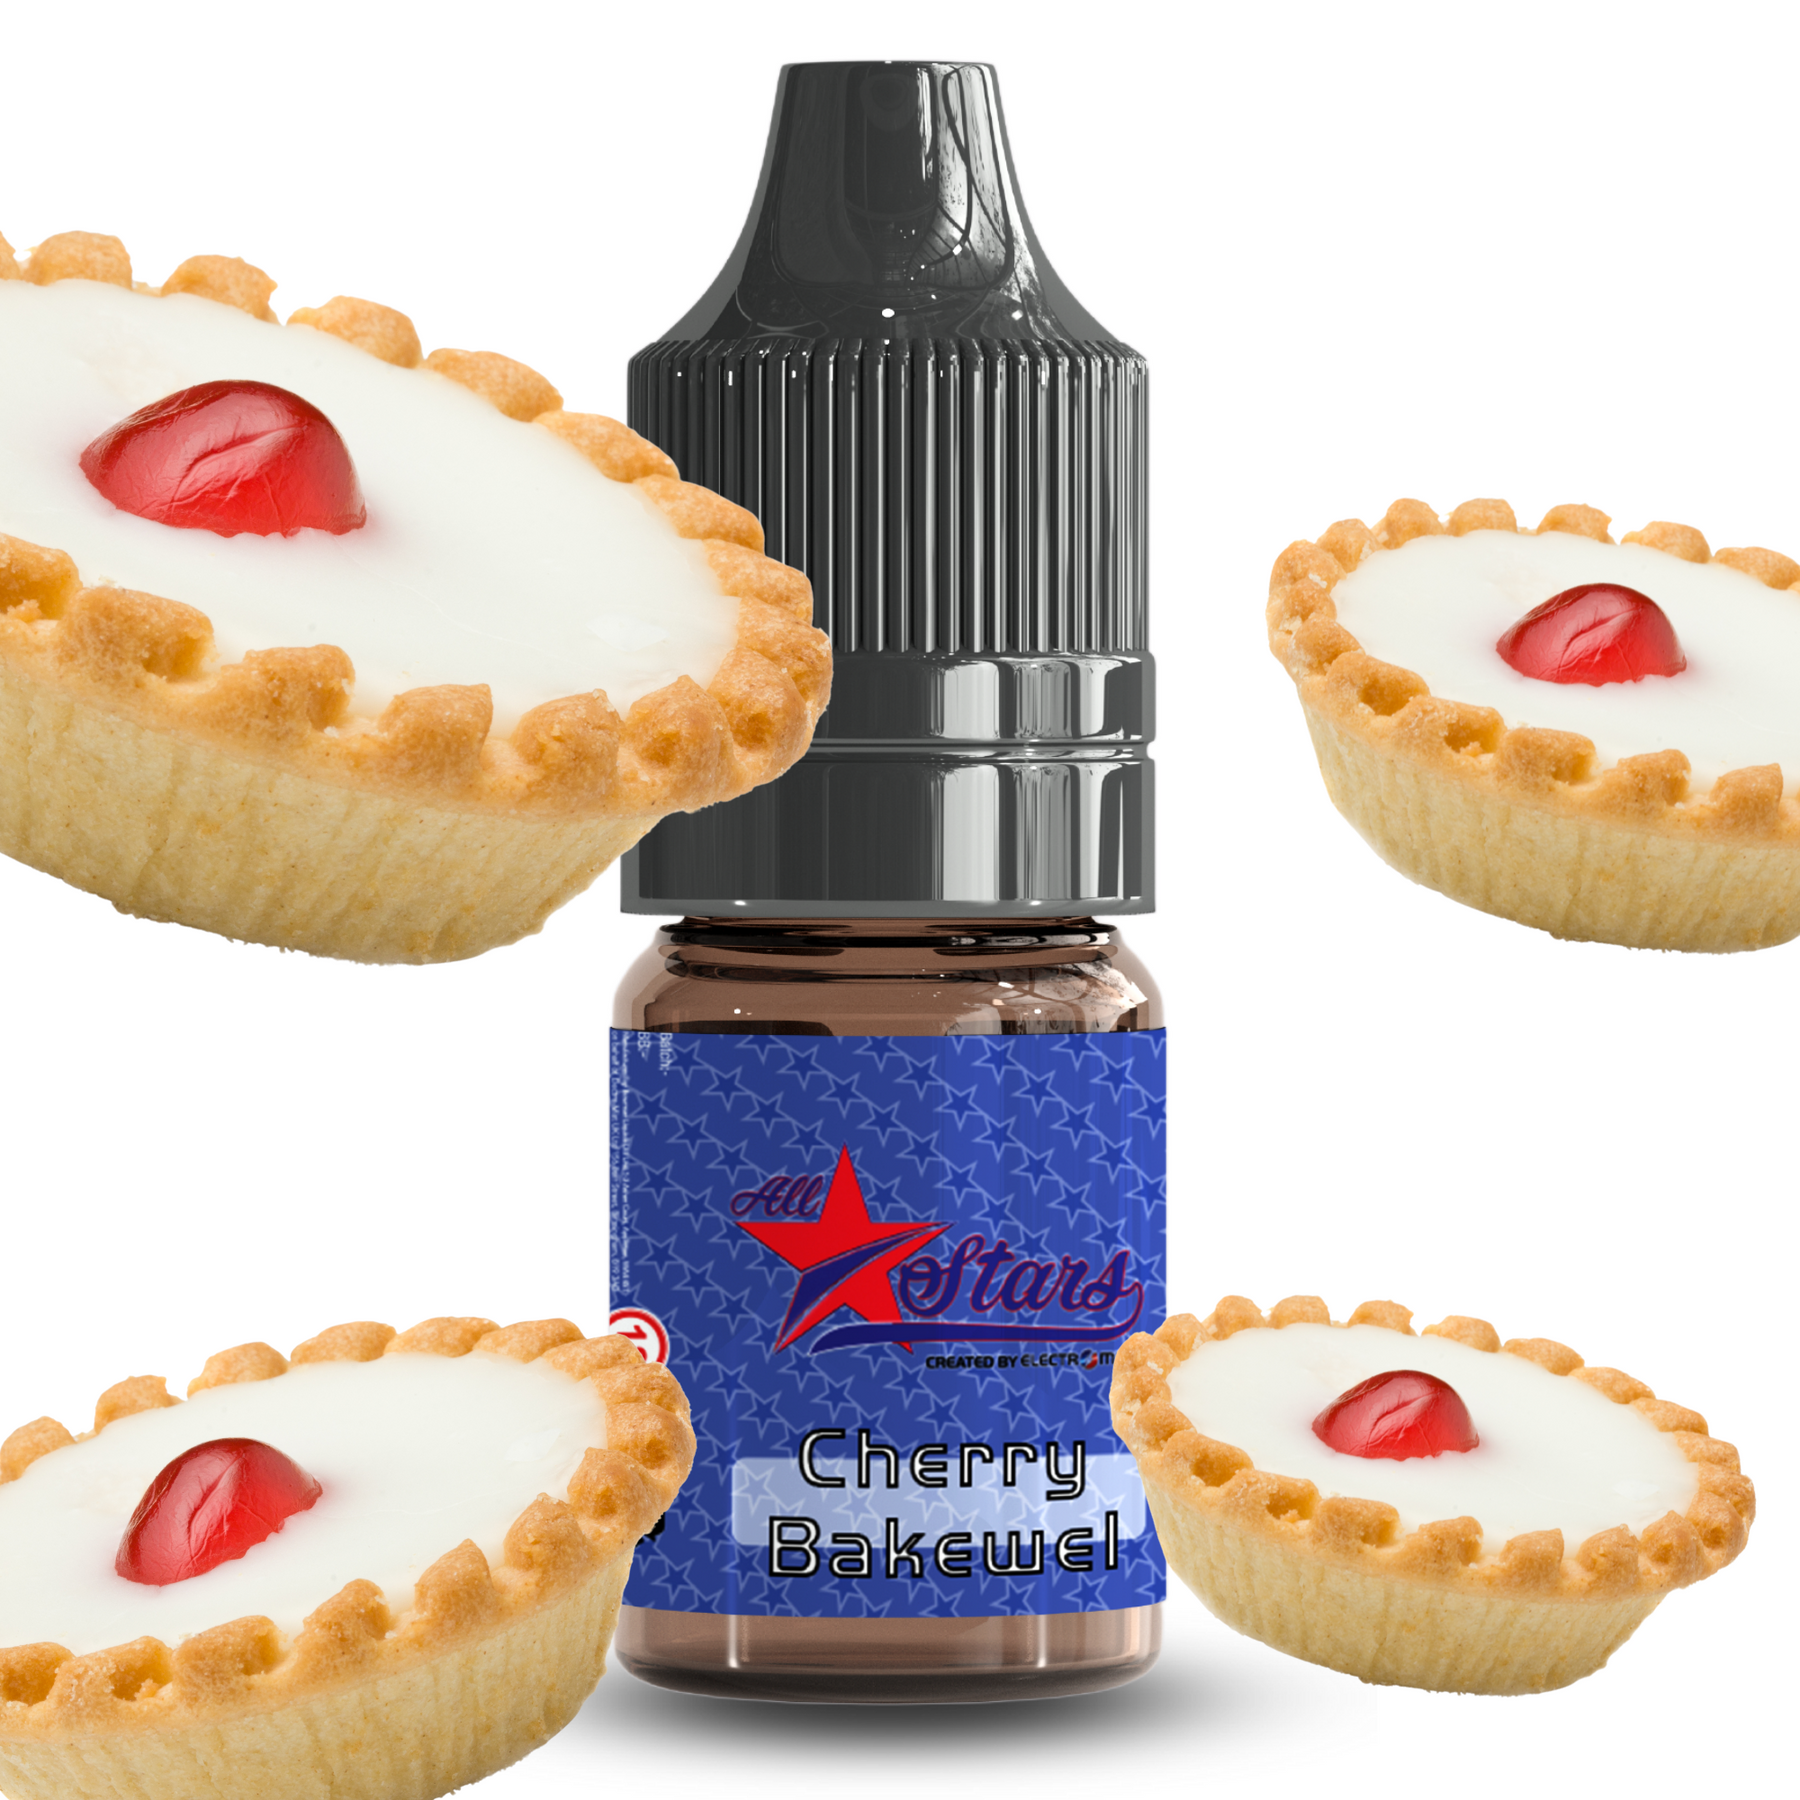 All Stars E-Liquid from the vape brand you can trust, Electromist, . Get your taste buds ready for a flavour sensation, Cherry Bakewell. Nicotine Content: 6mg/12mg/18mg Products may contain nicotine. For over 18s Only ejuice, vape pen, eliquid, e cigarette, 10ml, vaping, cloud, PG, VG, 60/40, vape liquid, Flavour, TPD